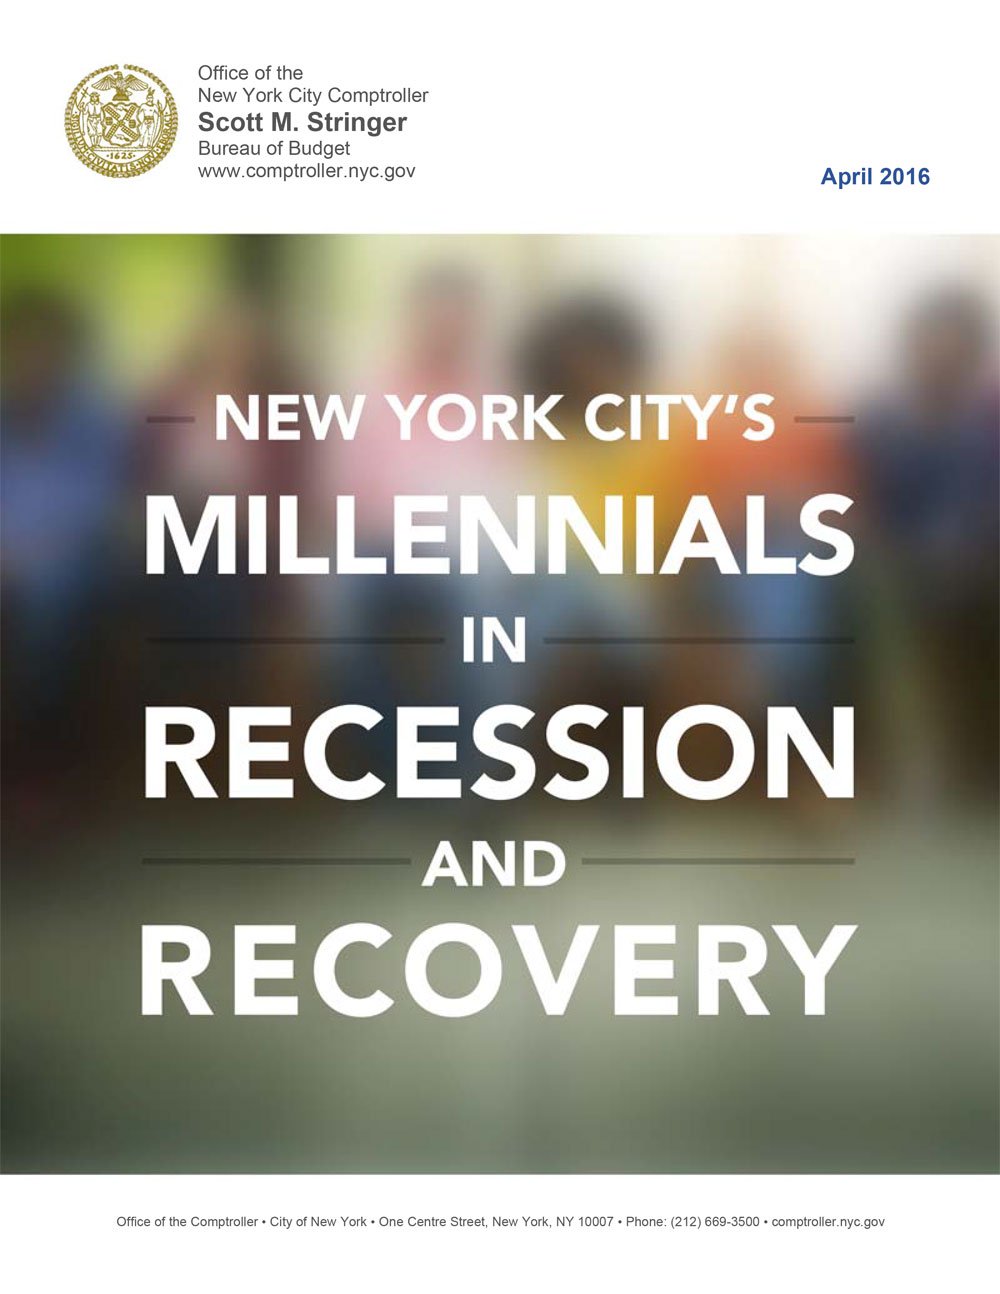 New York City S Millennials In Recession And Recovery Office Of The New York City Comptroller Scott M Stringer